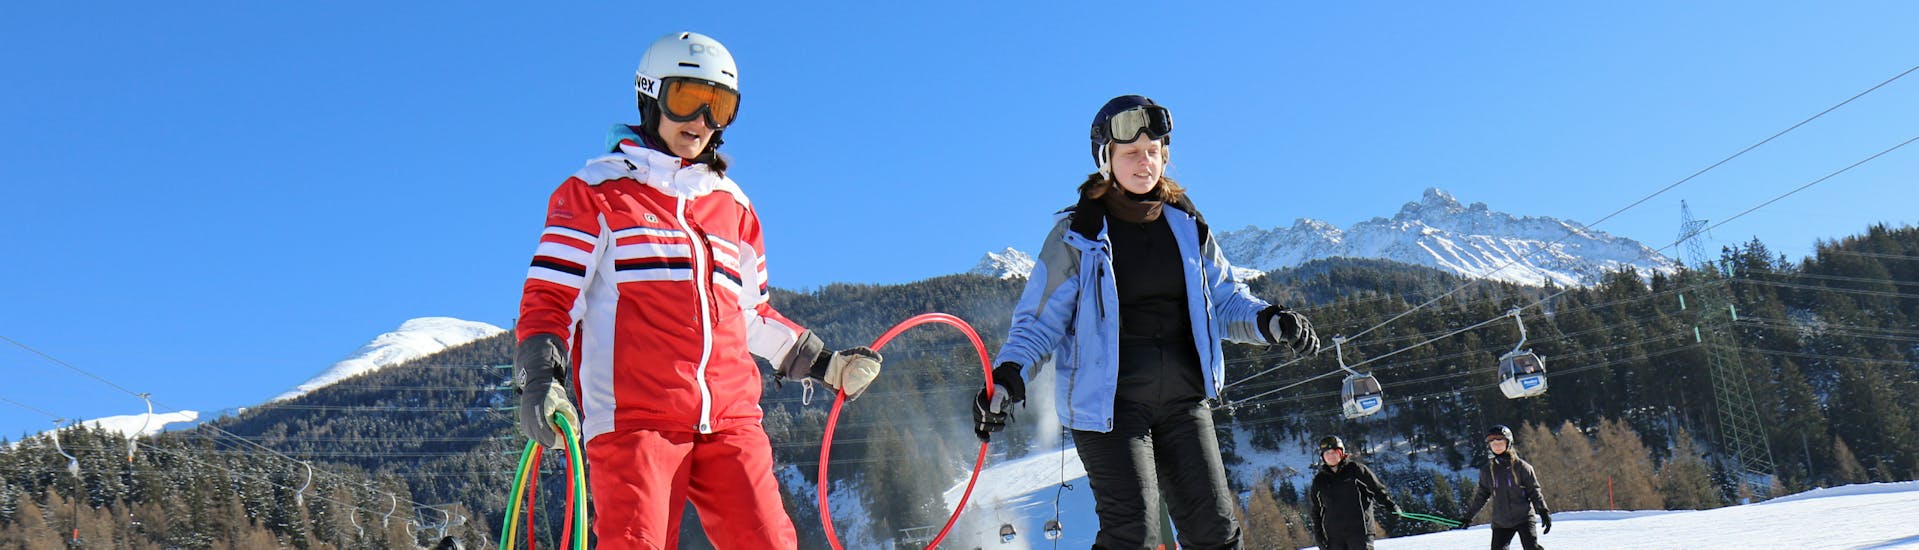 Private Ski Lessons for Adults in Belpiano&#x2F;Haideralm with Skischule Pfunds  - Hero image